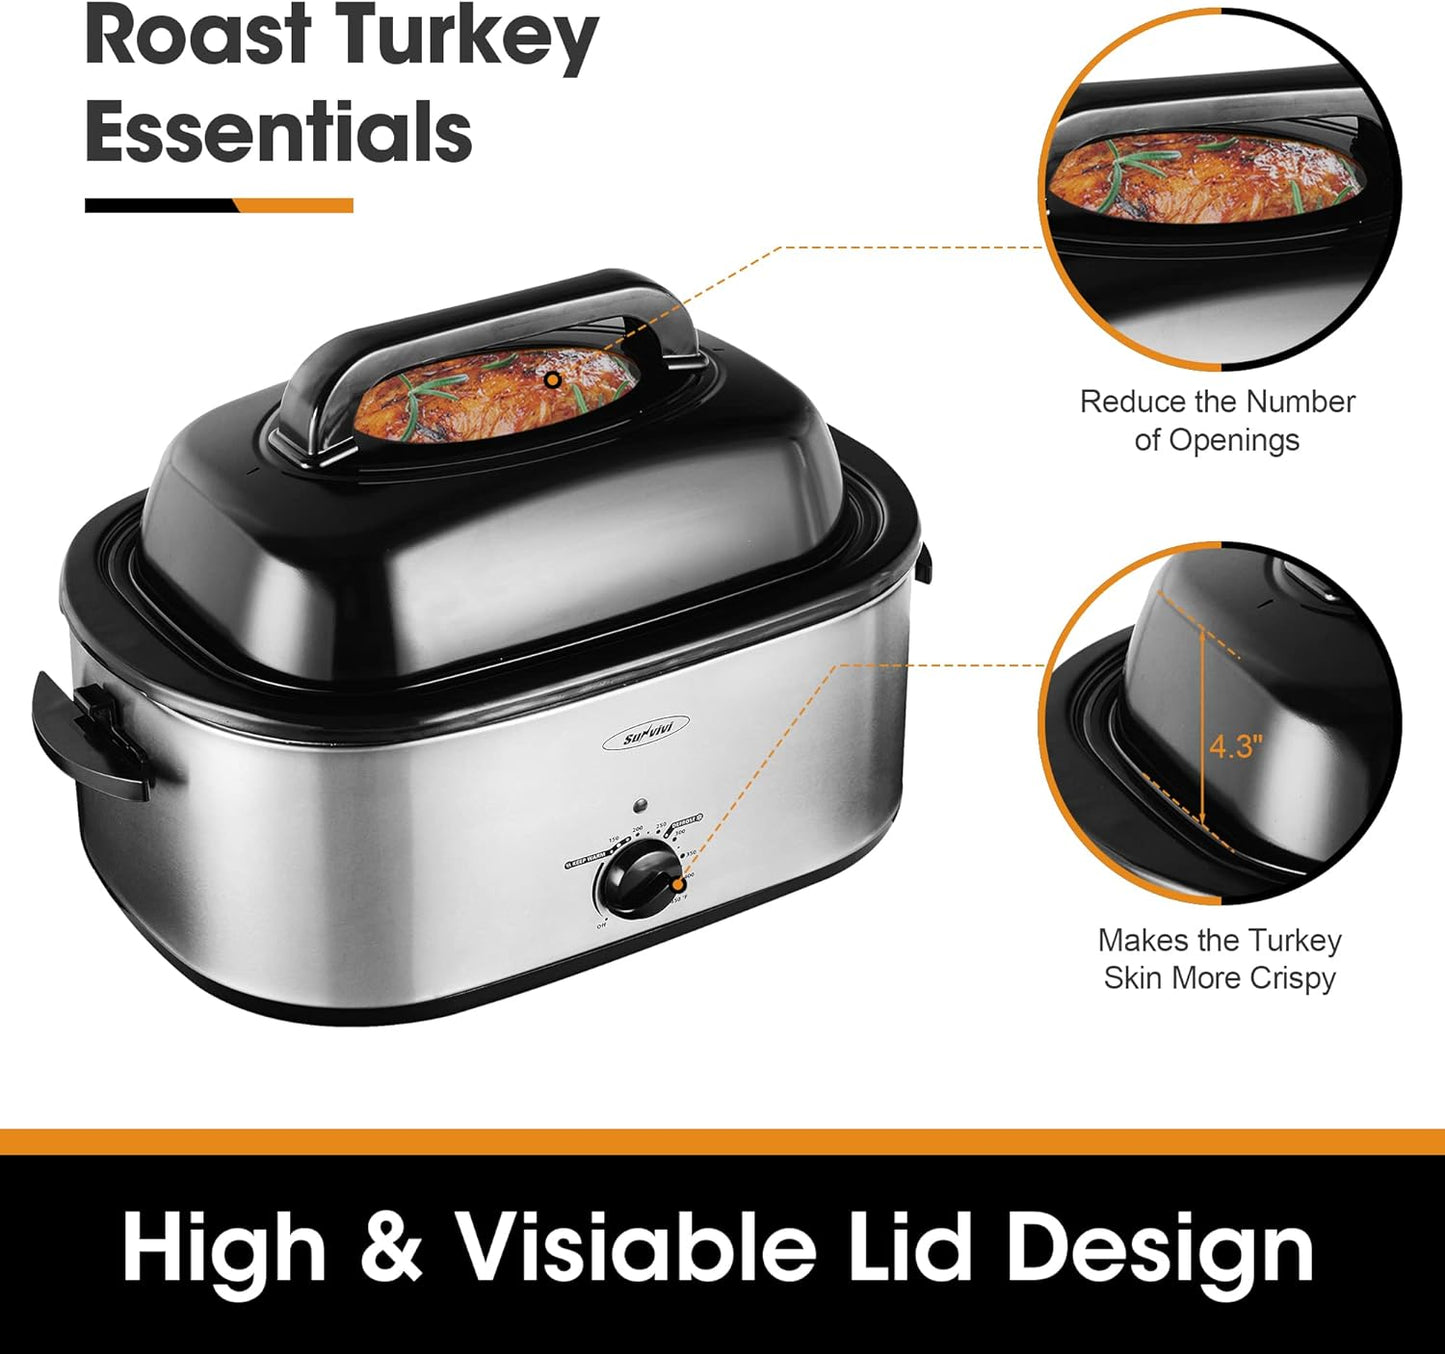 Roaster Oven with Self-Basting Lid, Electric Roaster with Removable Pan & Rack, 150-450°F Full-Range Temperature Control with Defrost/Warm Function, Stainless Steel, Silver